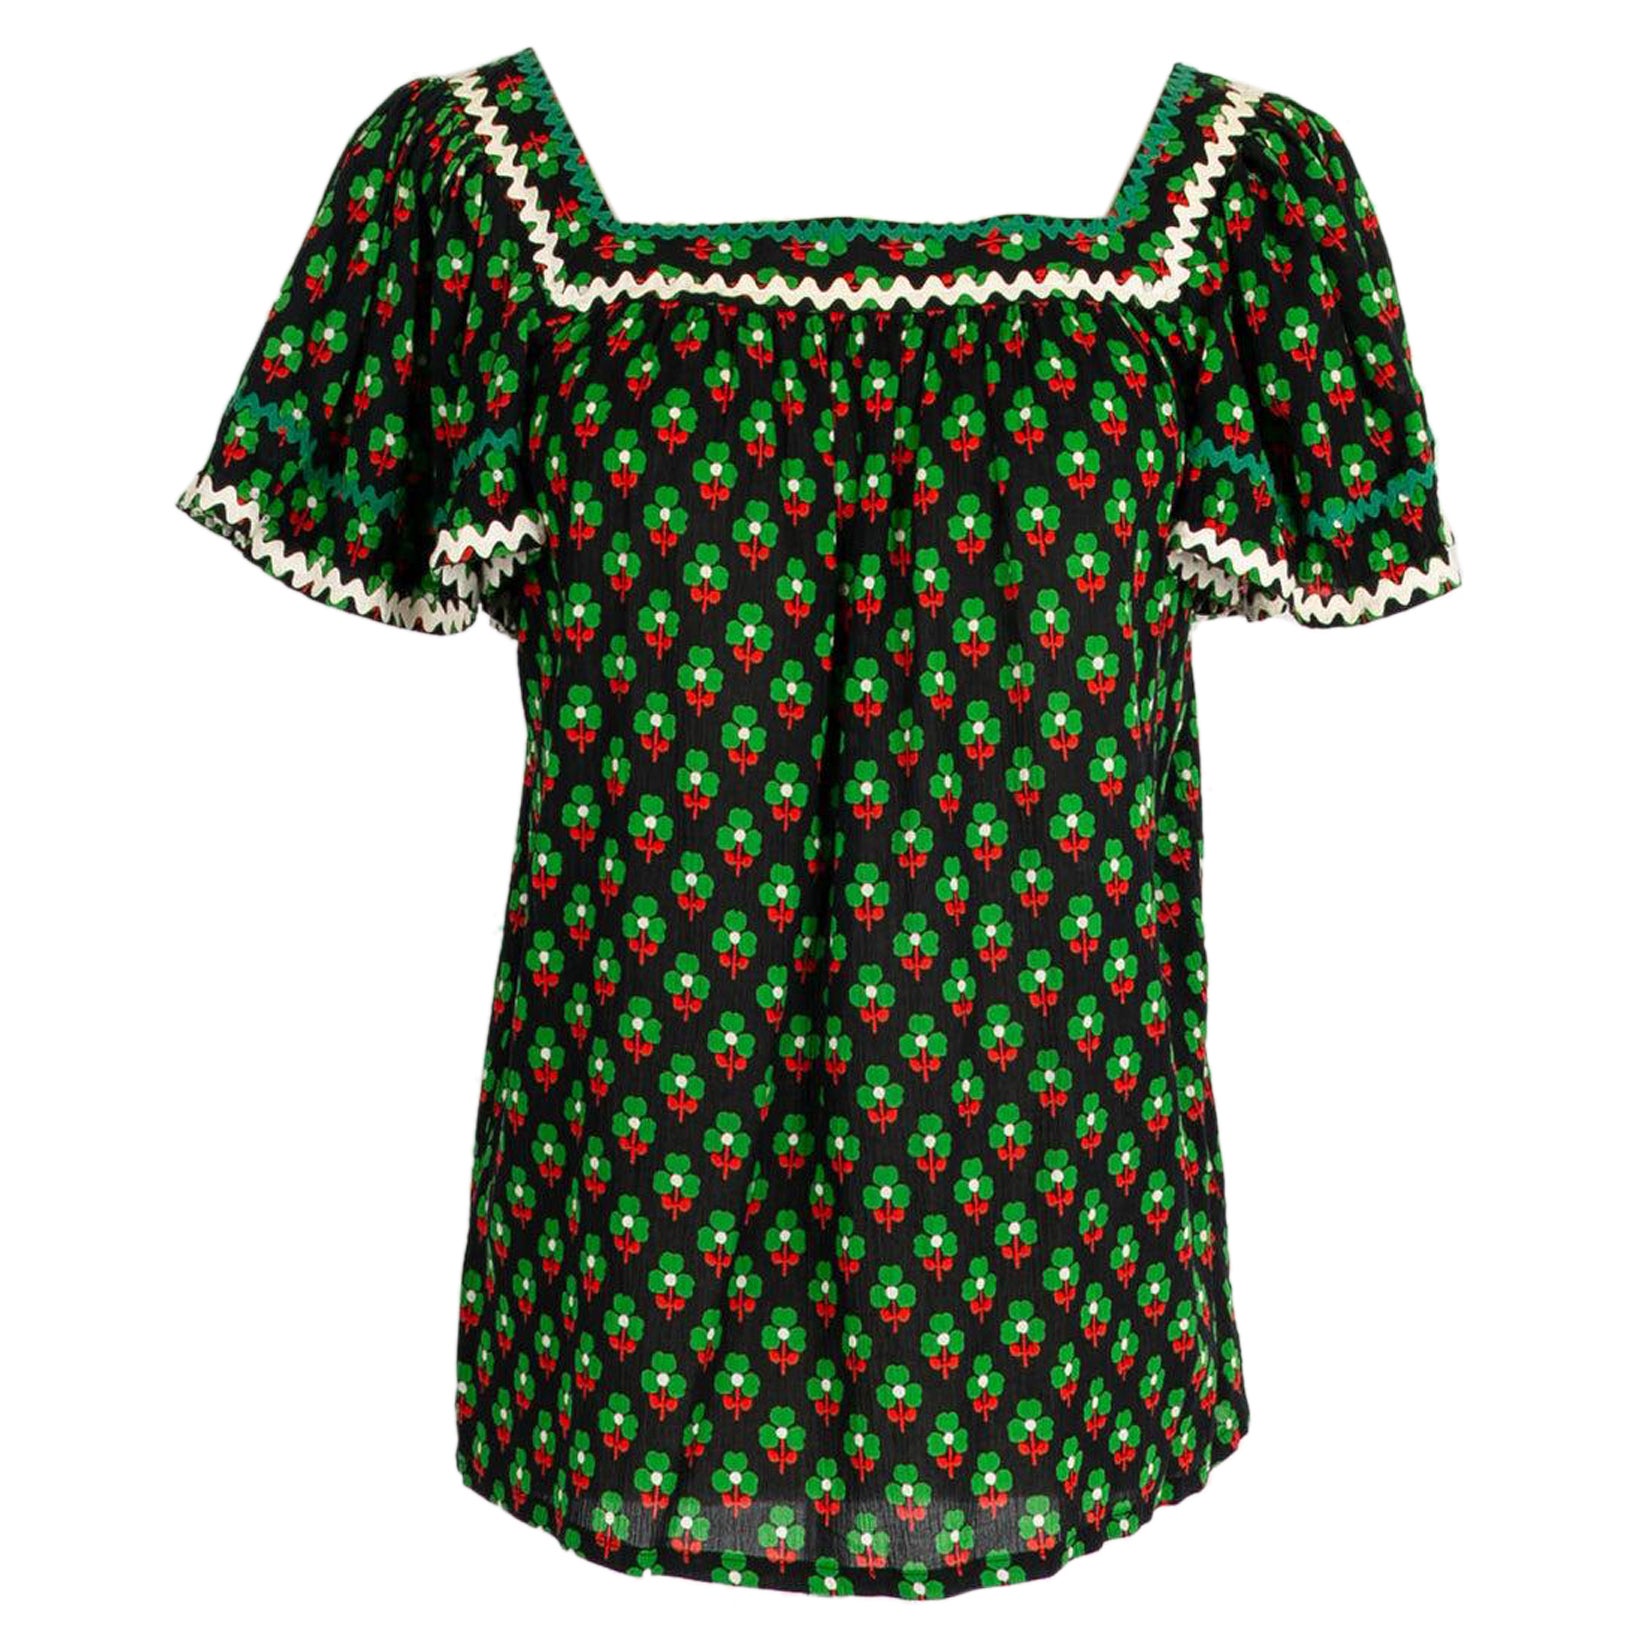 Yves Saint Laurent Black and Green Cotton Top